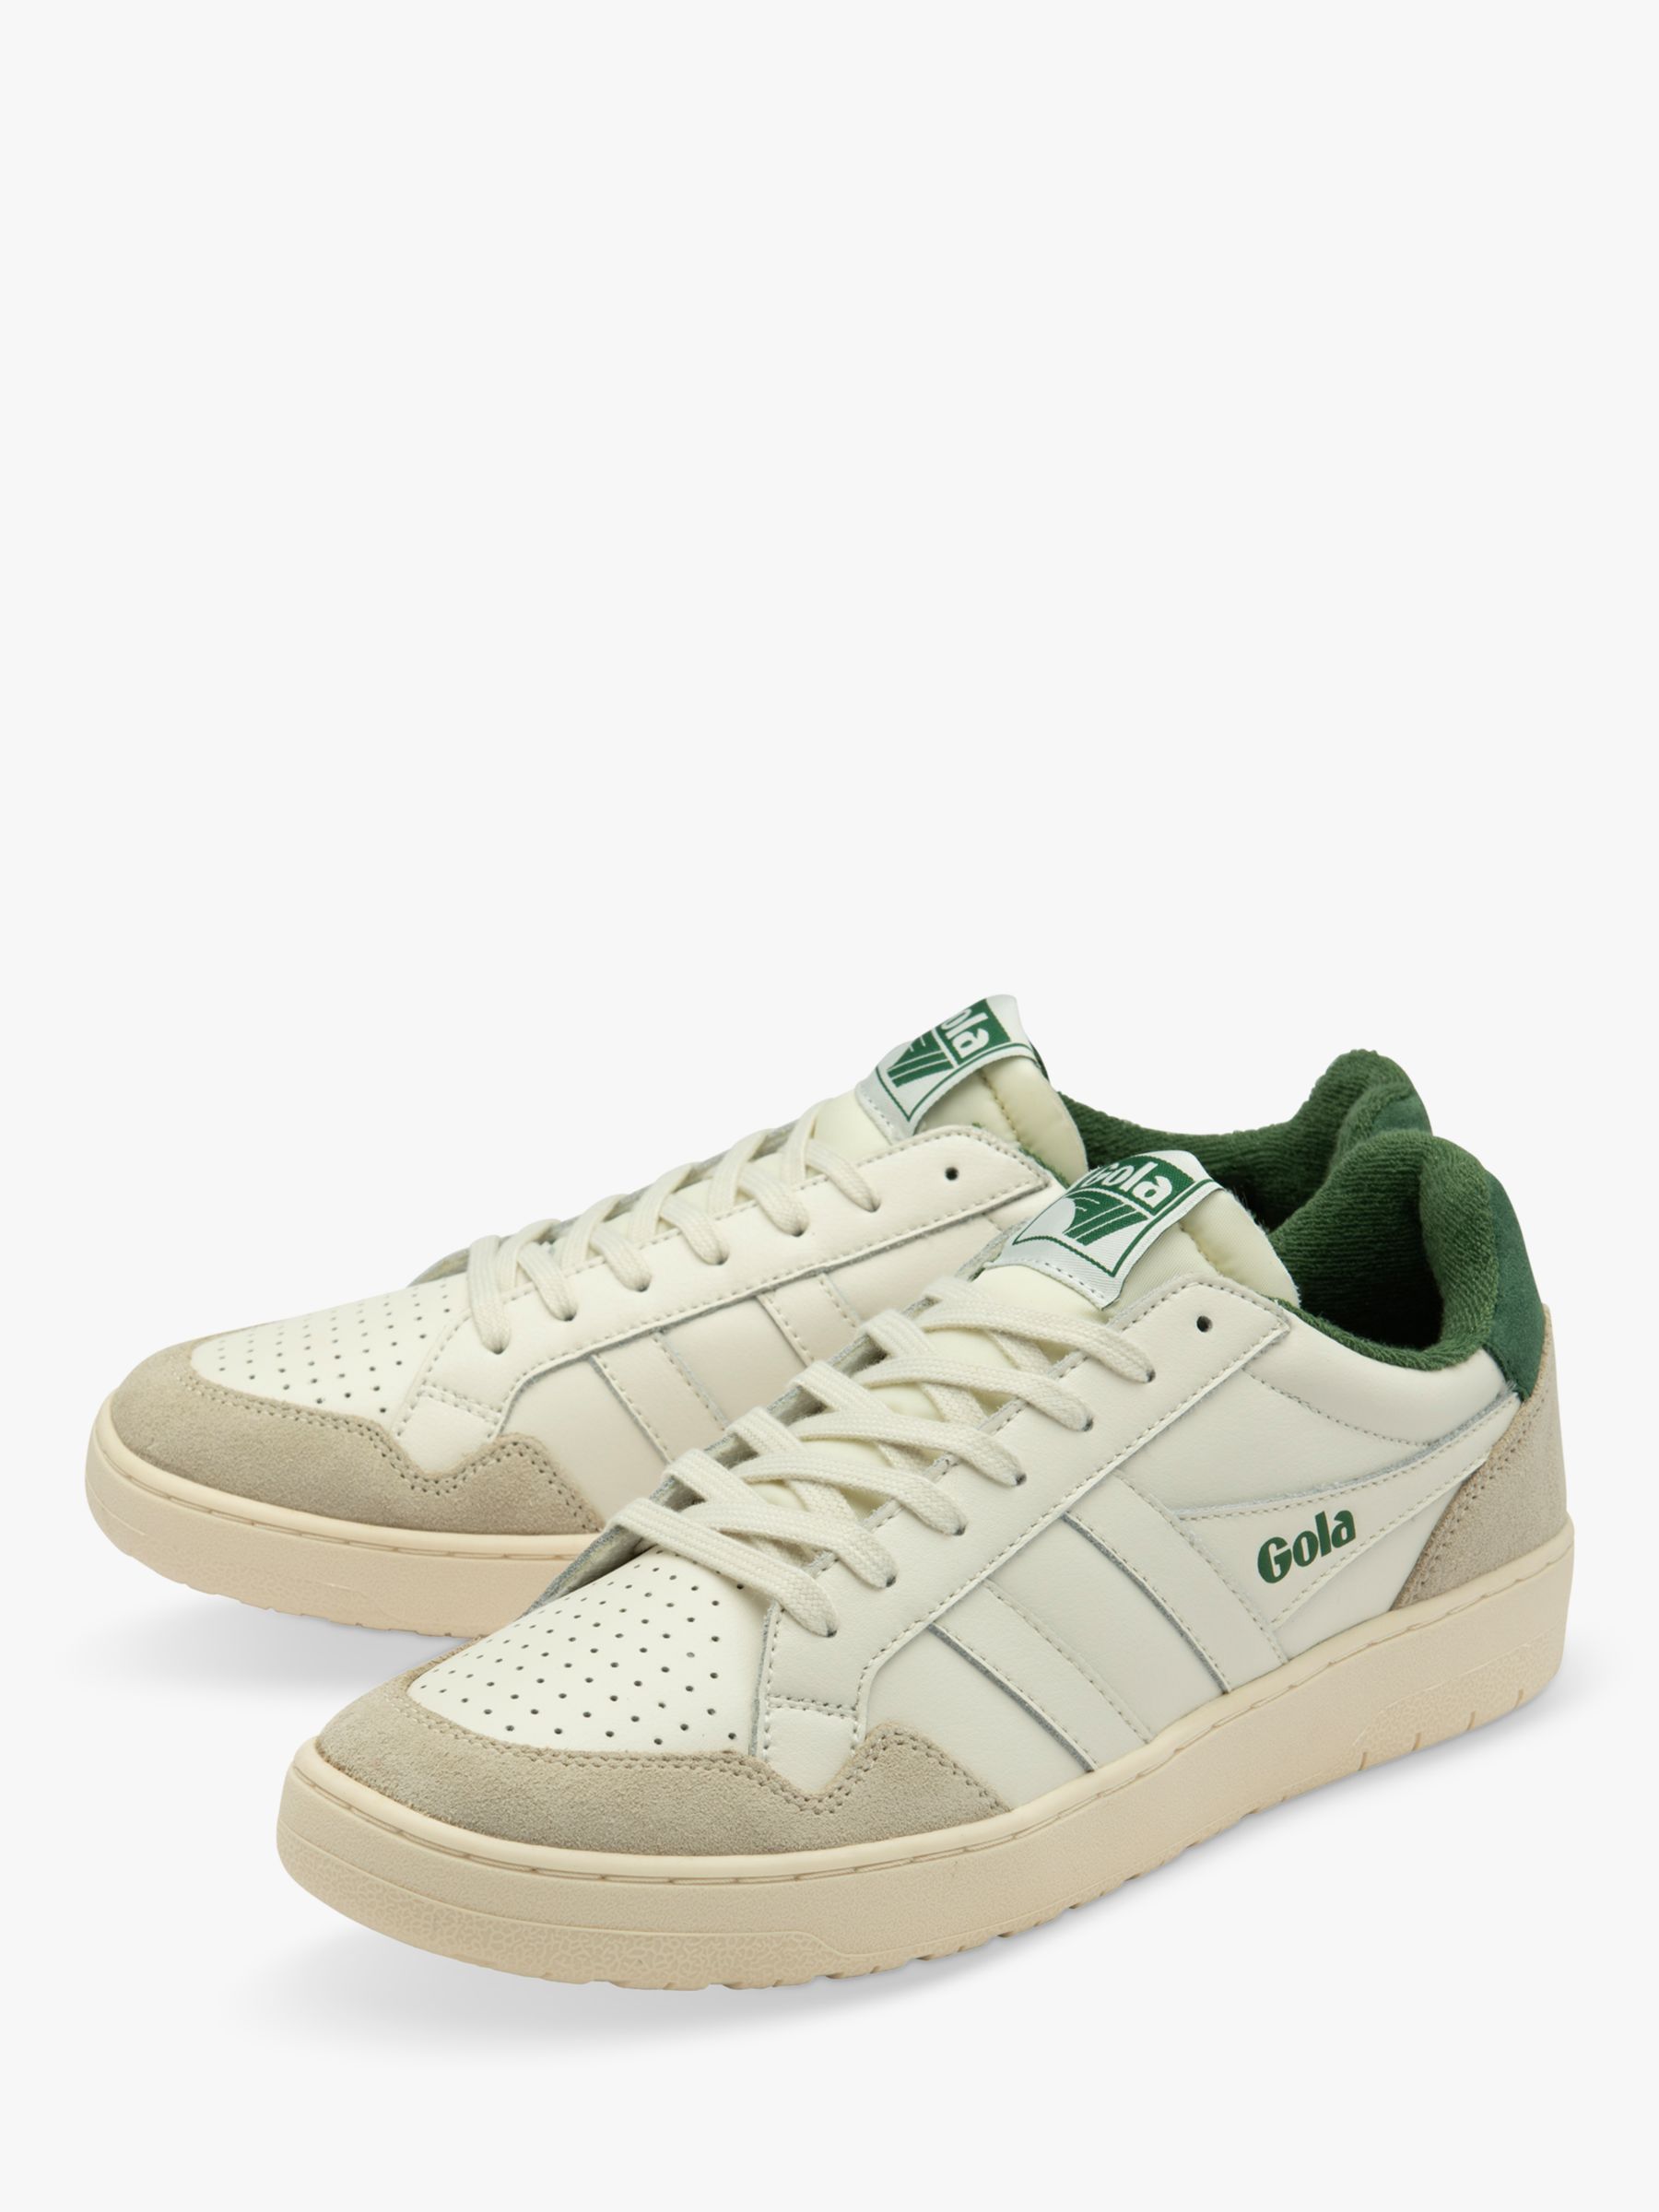 Buy Gola Eagle Leather Lace Up Trainers Online at johnlewis.com